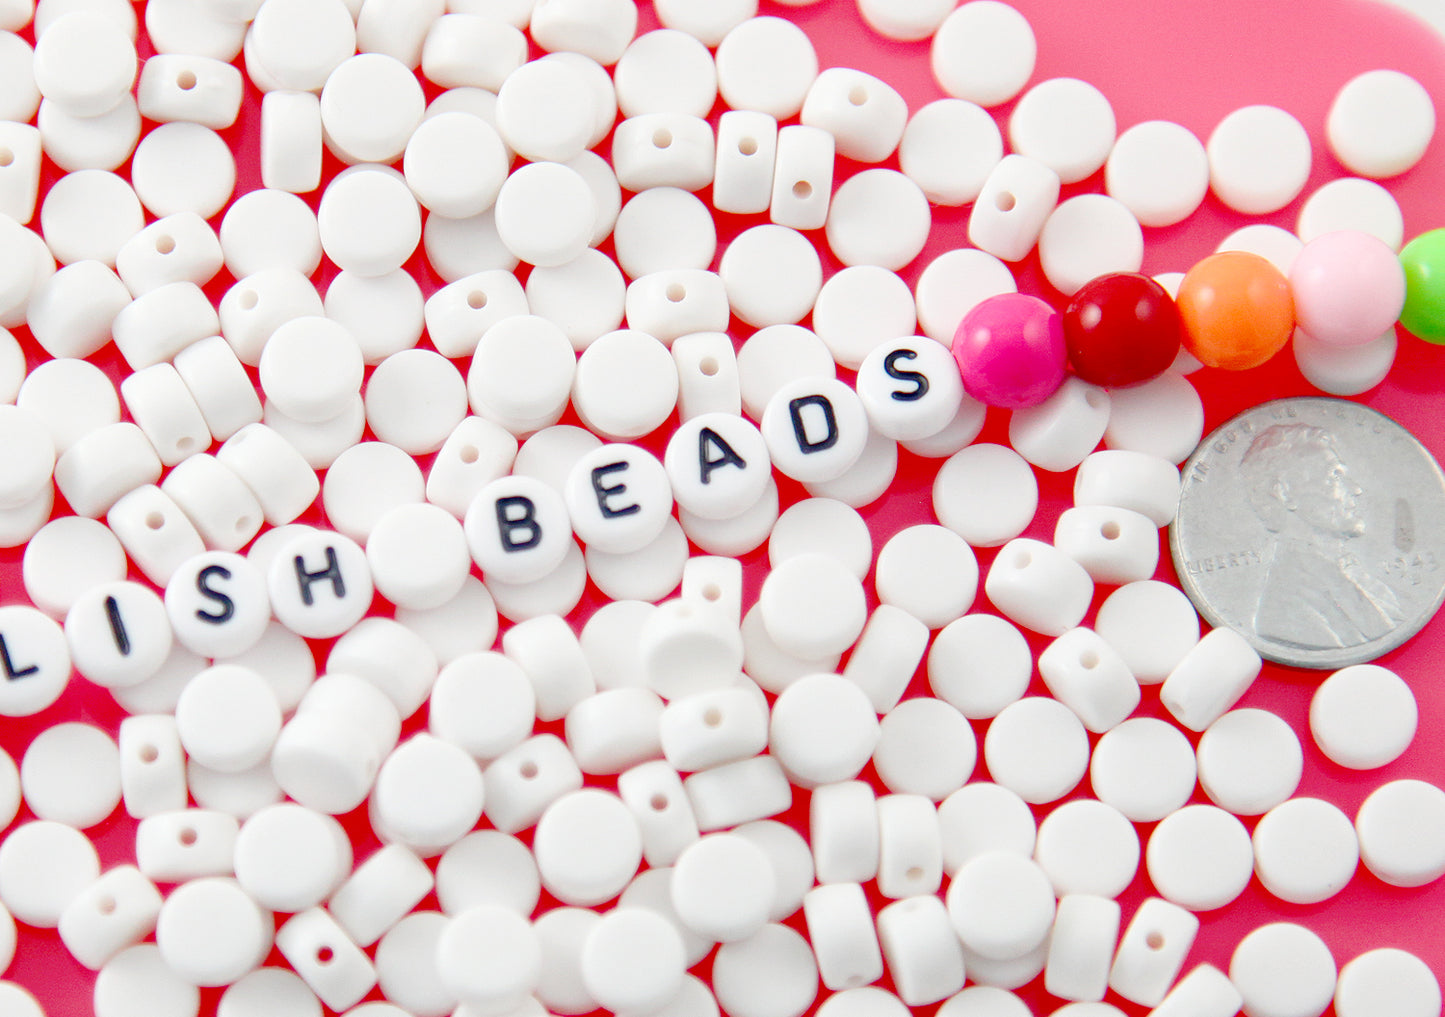 Blank Letter Beads - 7mm Blanks for Alphabet Beads - Little Round White Flat Disc Coin Acrylic Beads - 300 pc set